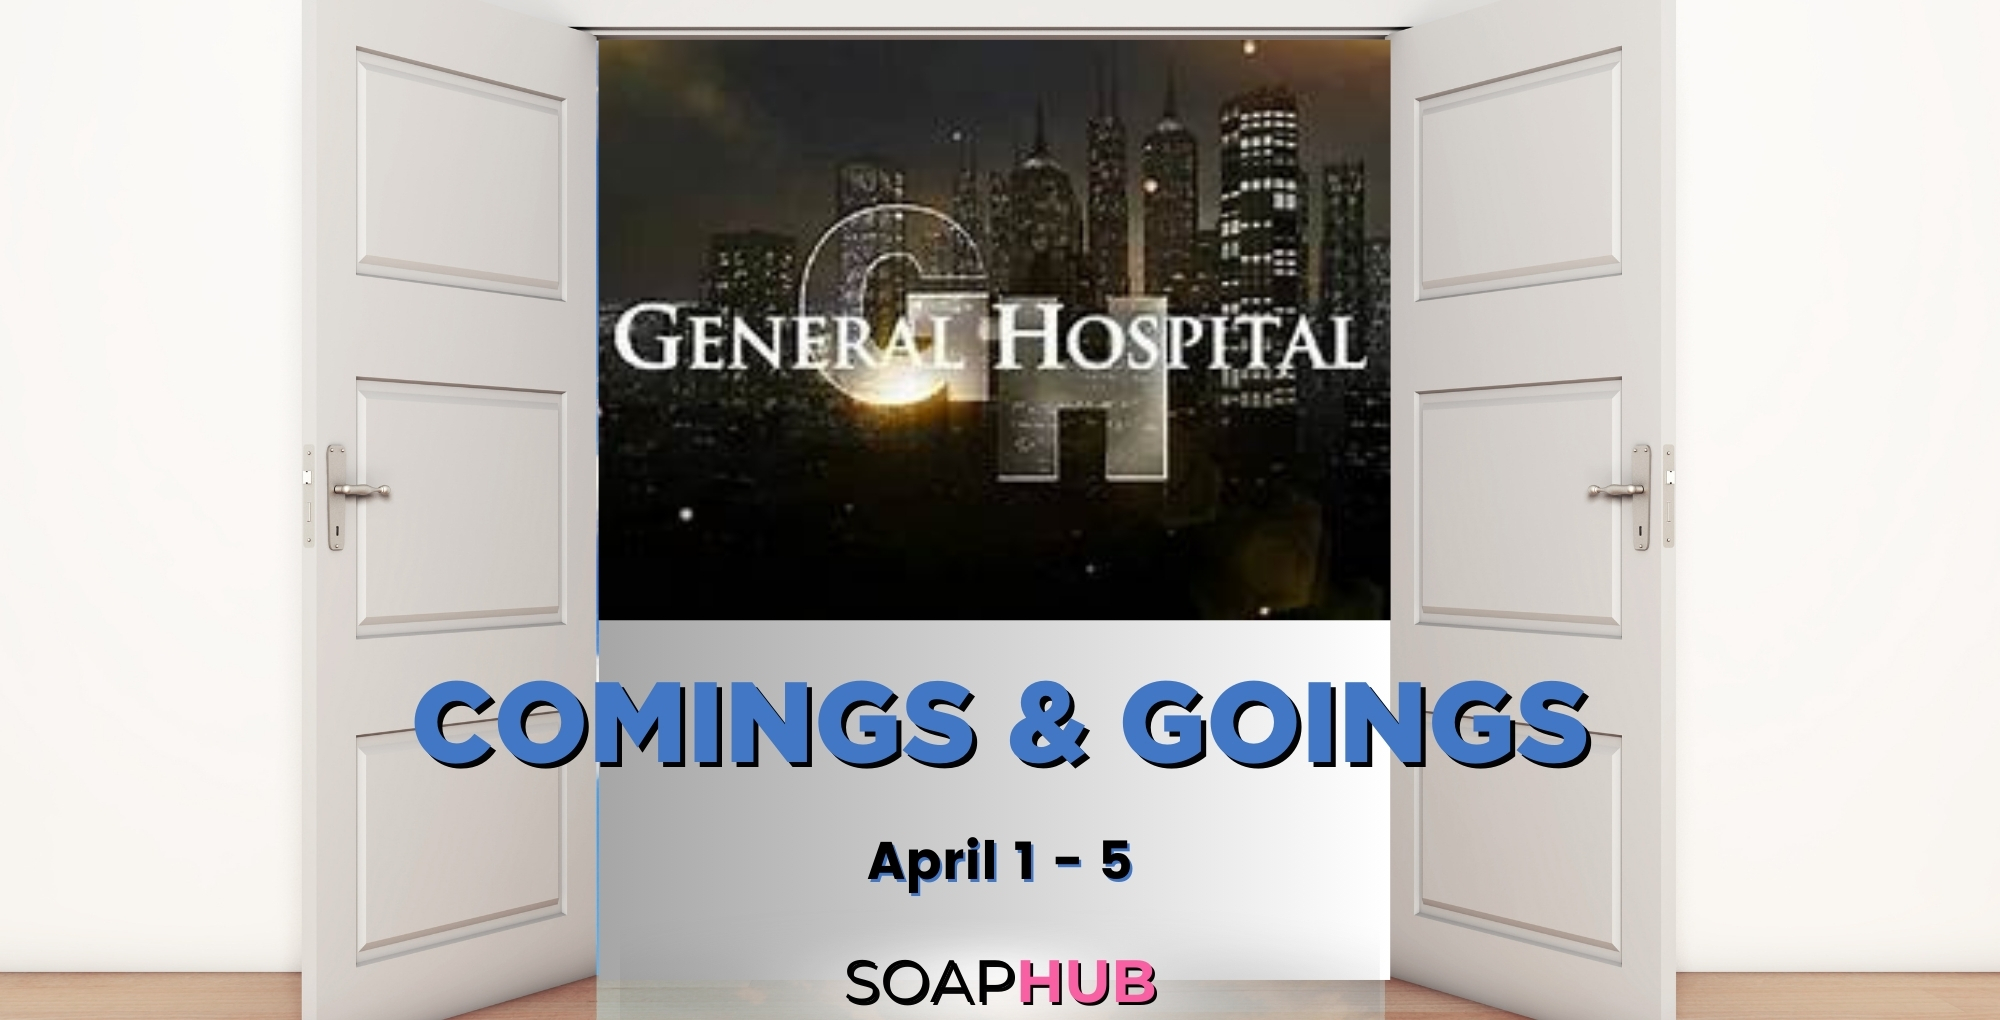 General Hospital comings and goings for the week of April 1 - 5 with the Soap Hub logo across the bottom.